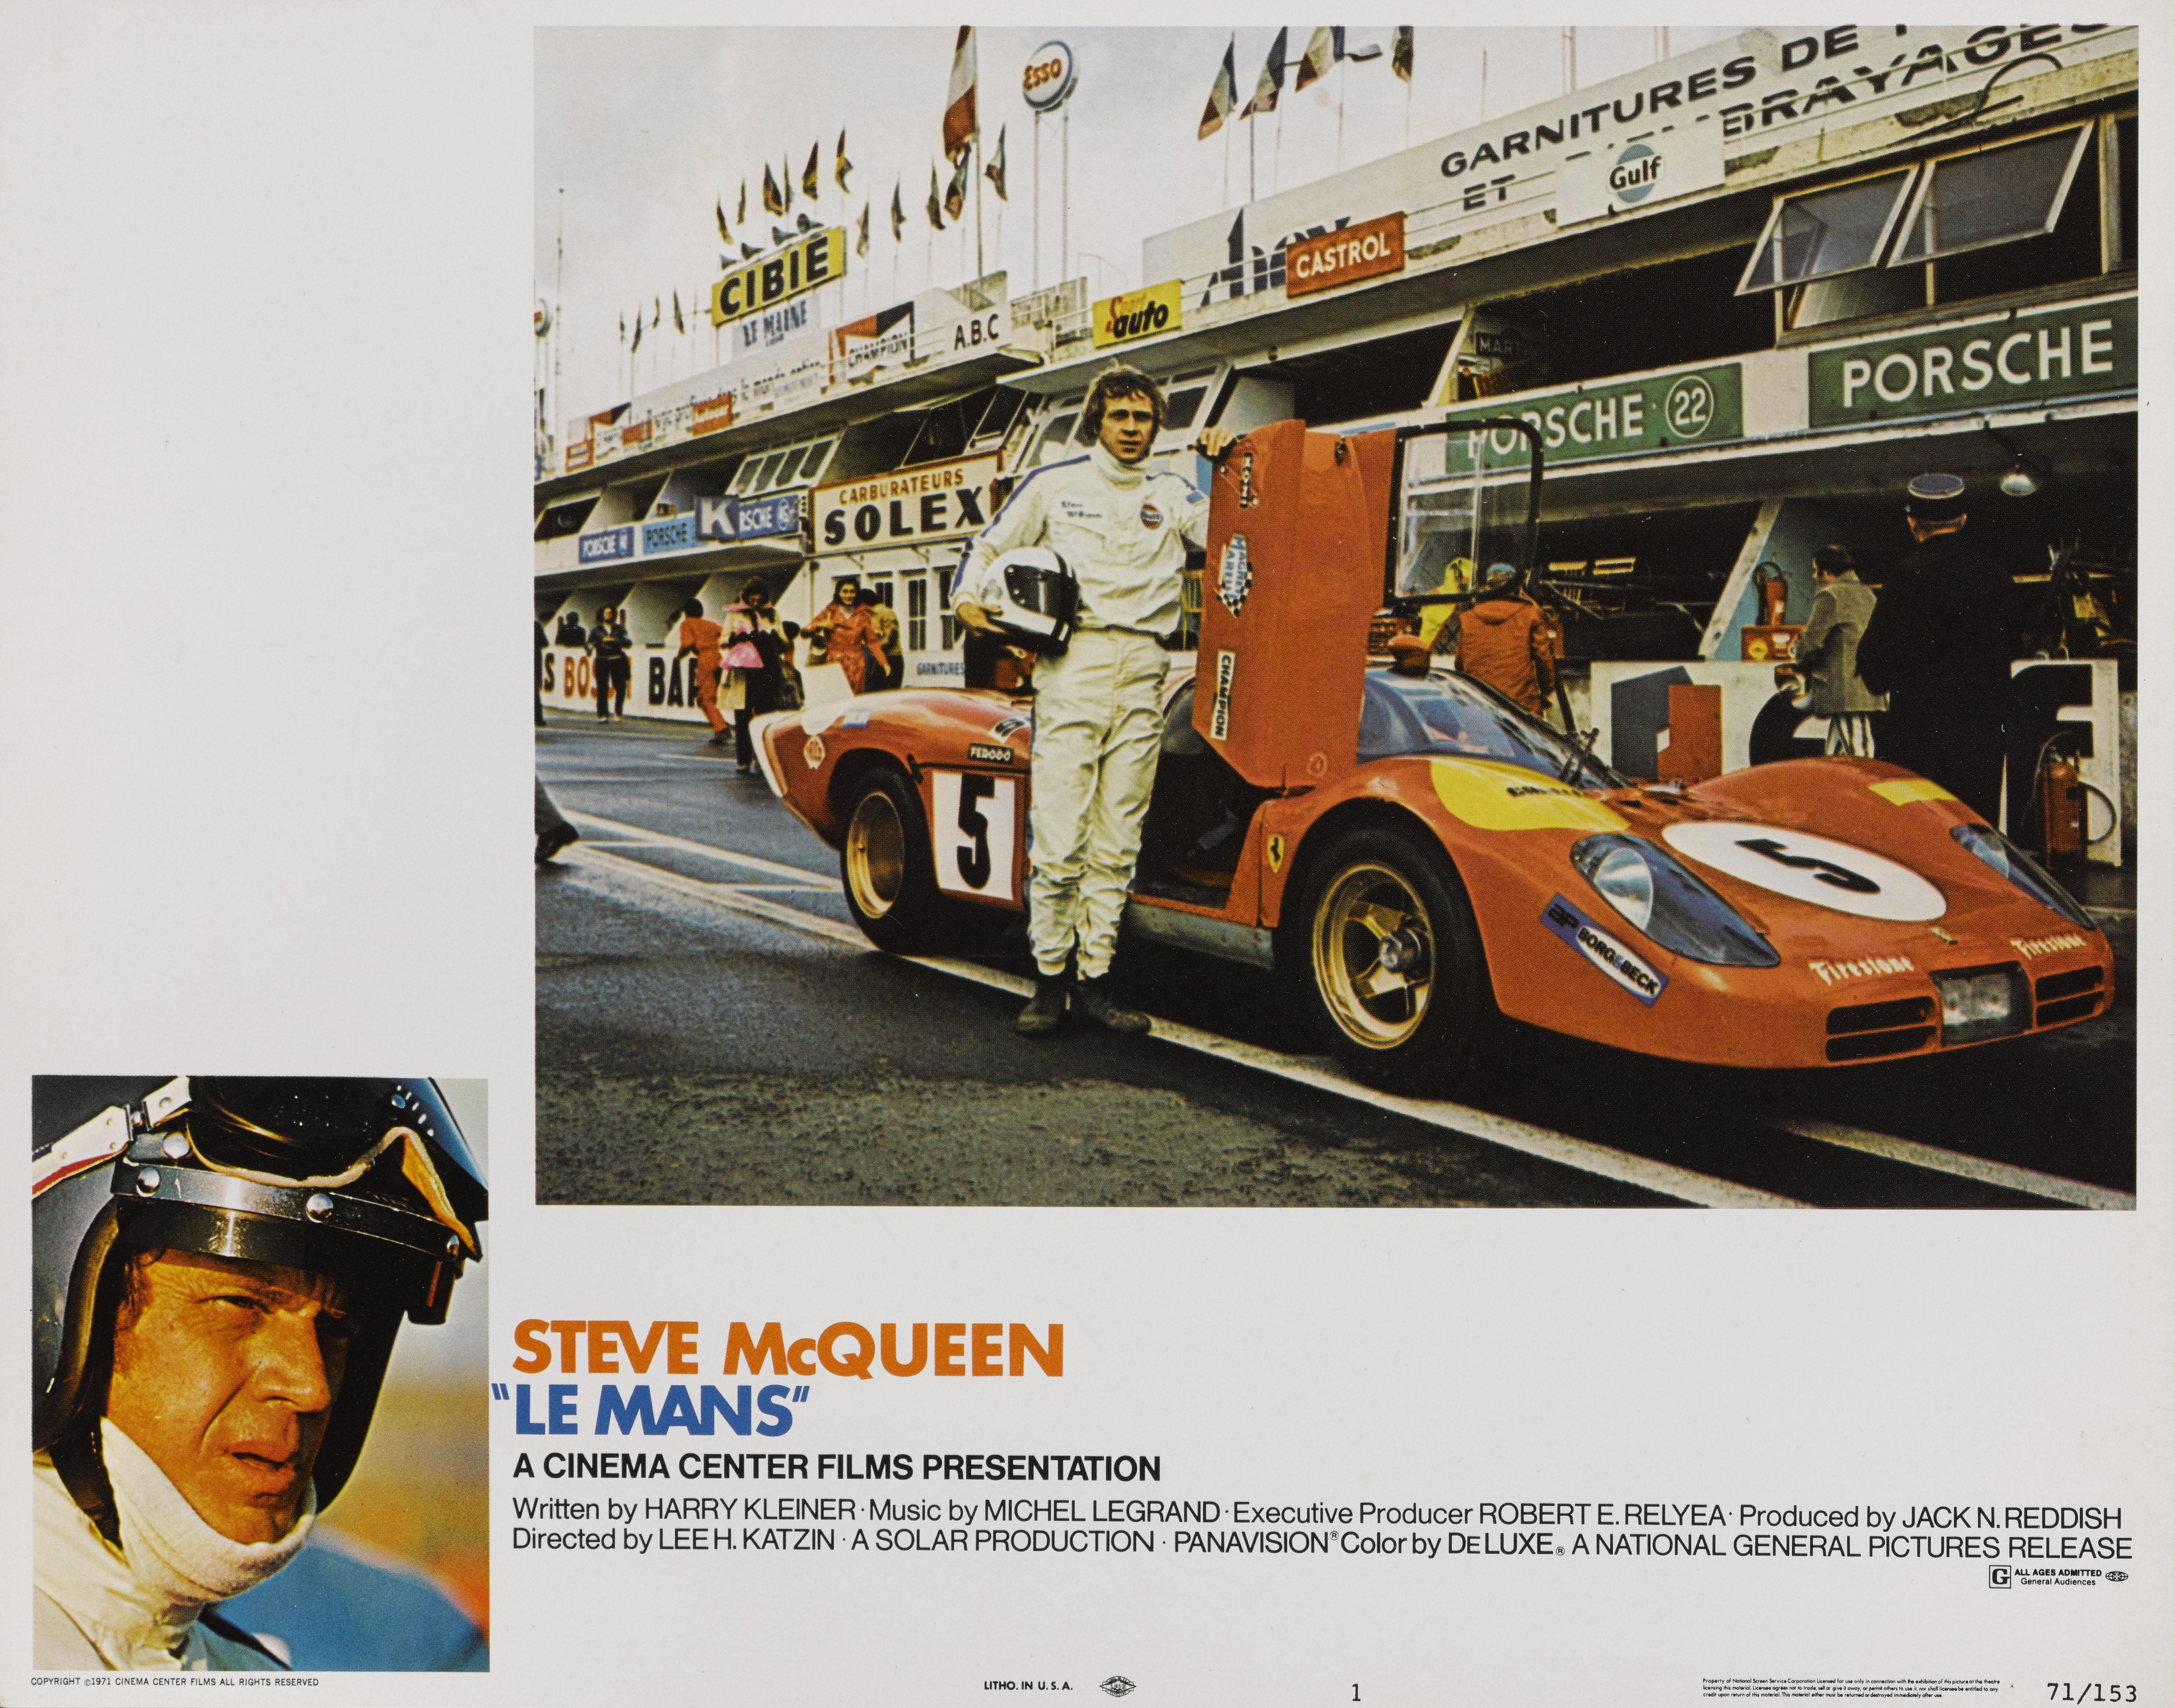 Original US Lobby card for Steve McQueen's 1971 film Le Mans. This card shows him standing next to the Porsche 908 K Flunder Spyder which was his personal car.